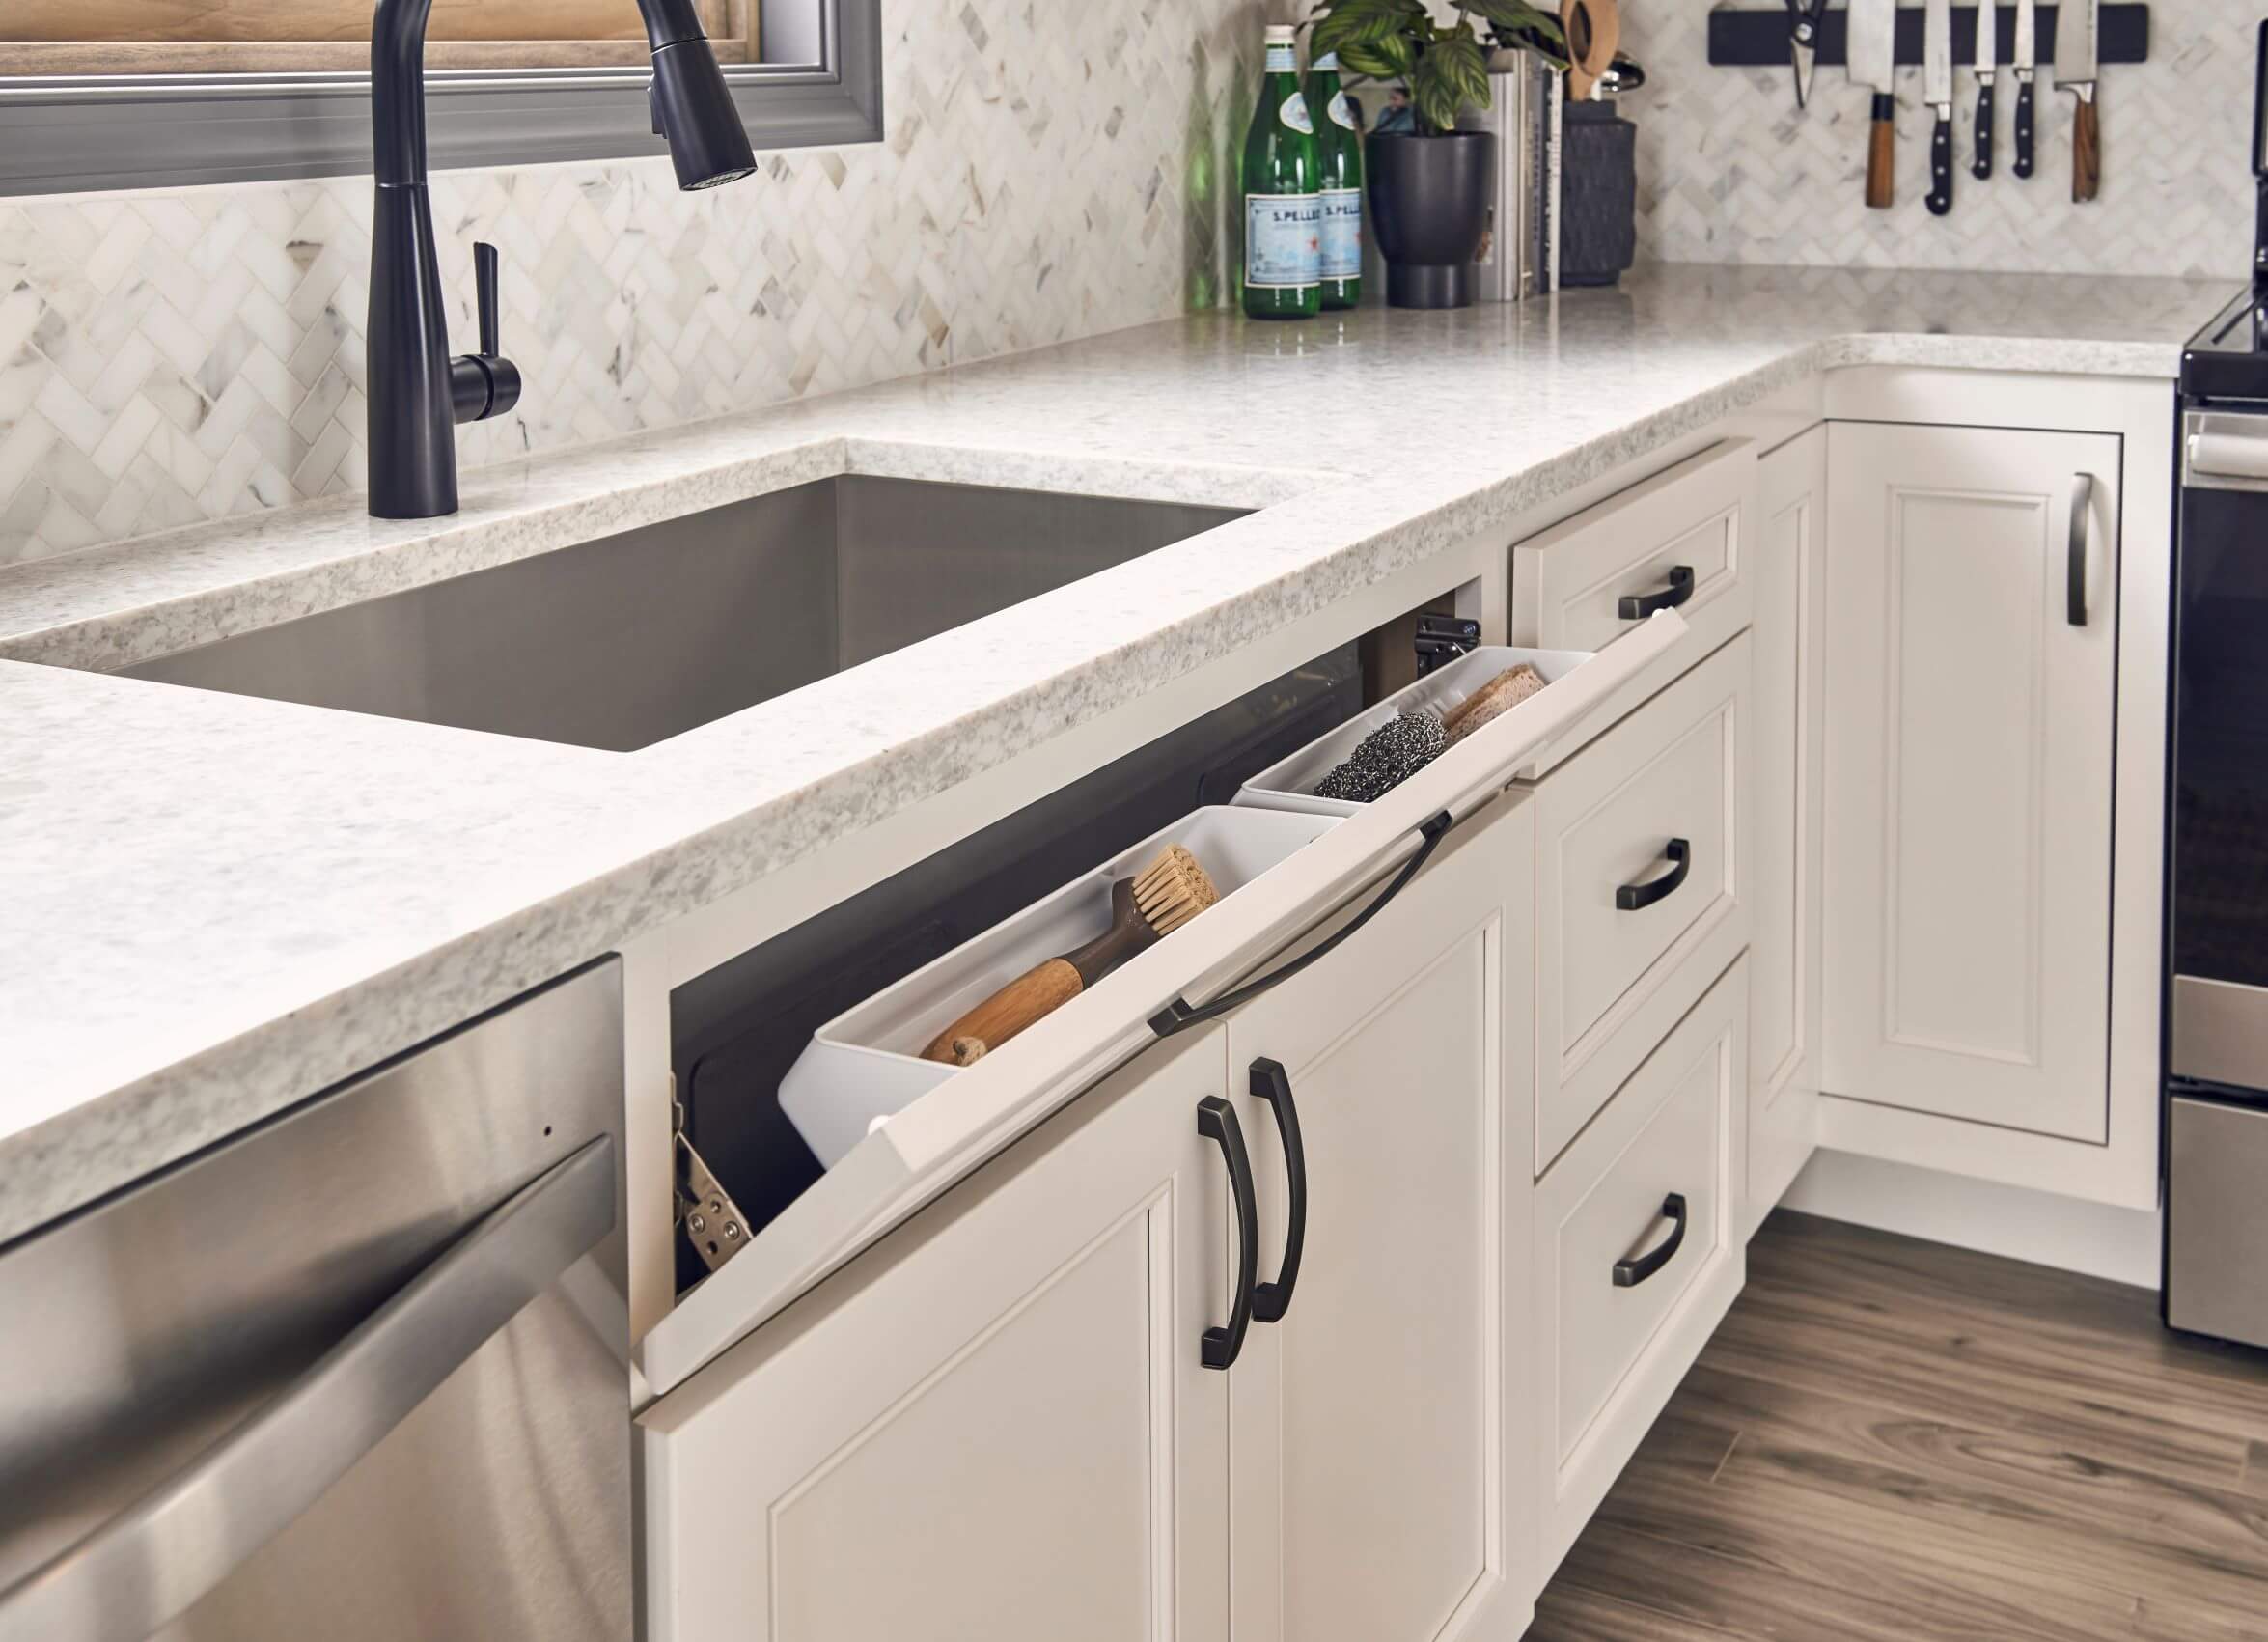 We offer a lot of affordable features that you've wanted to include in your kitchen renovation